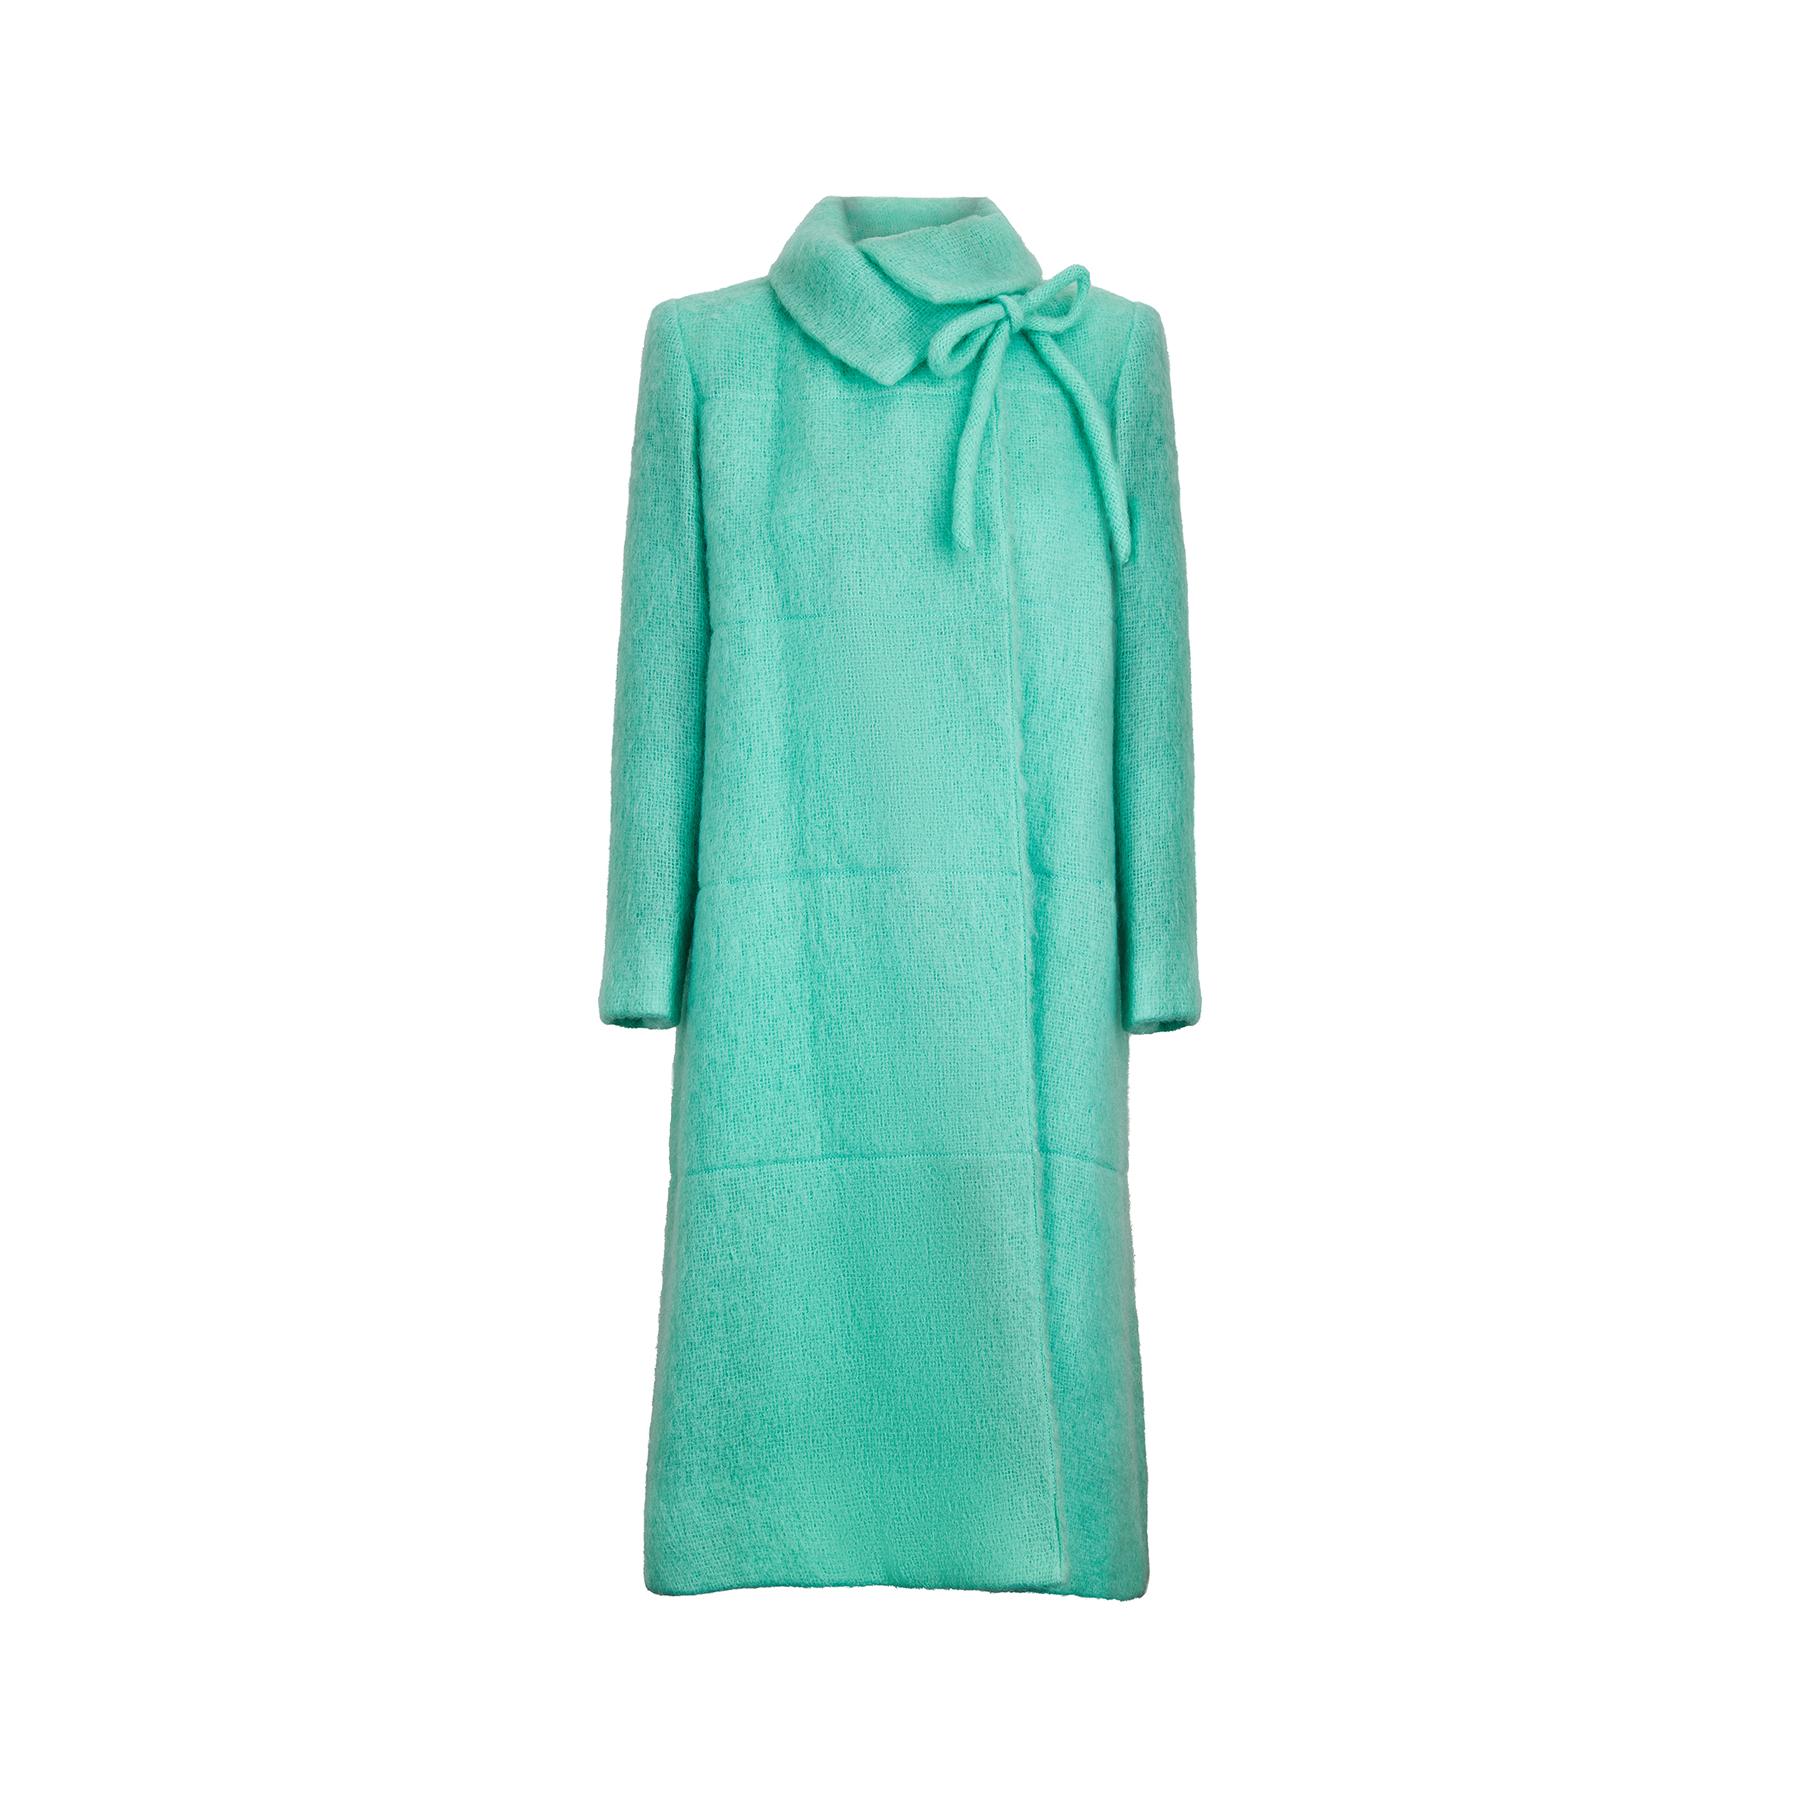 This early vintage Chanel Mohair coat is the most perfect shade of seafoam green and cut in an elegant and gently flared silhouette. It features a high collar with bow detail at the neck, and fastens with a single button closure on the collar line